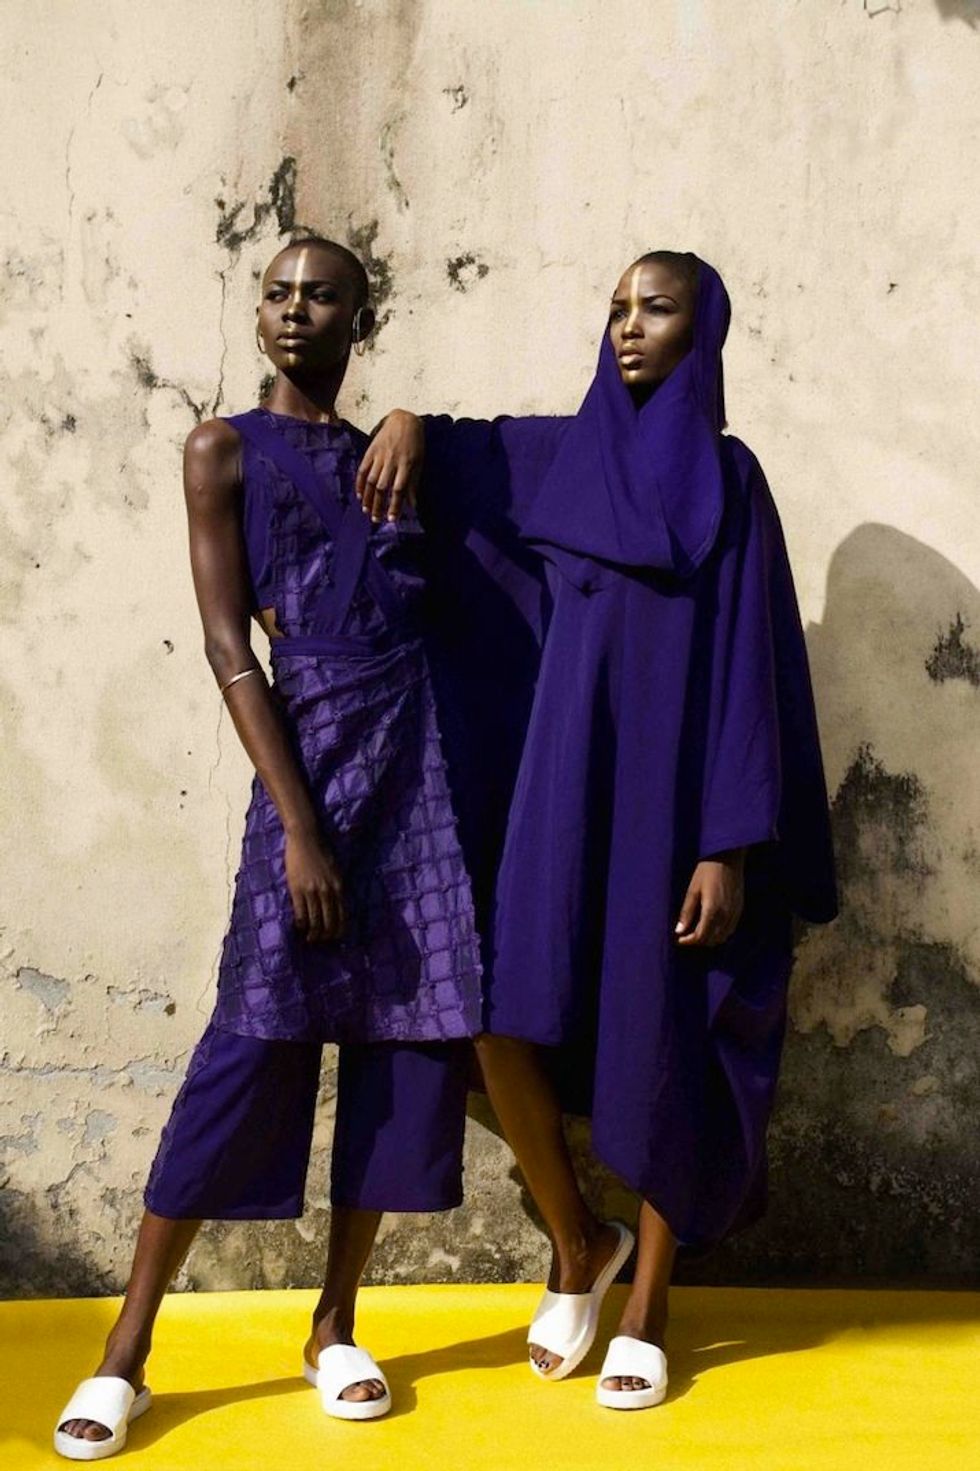 IAMISIGO Shares 'Taboo' Collection Inspired By The Wodaabe